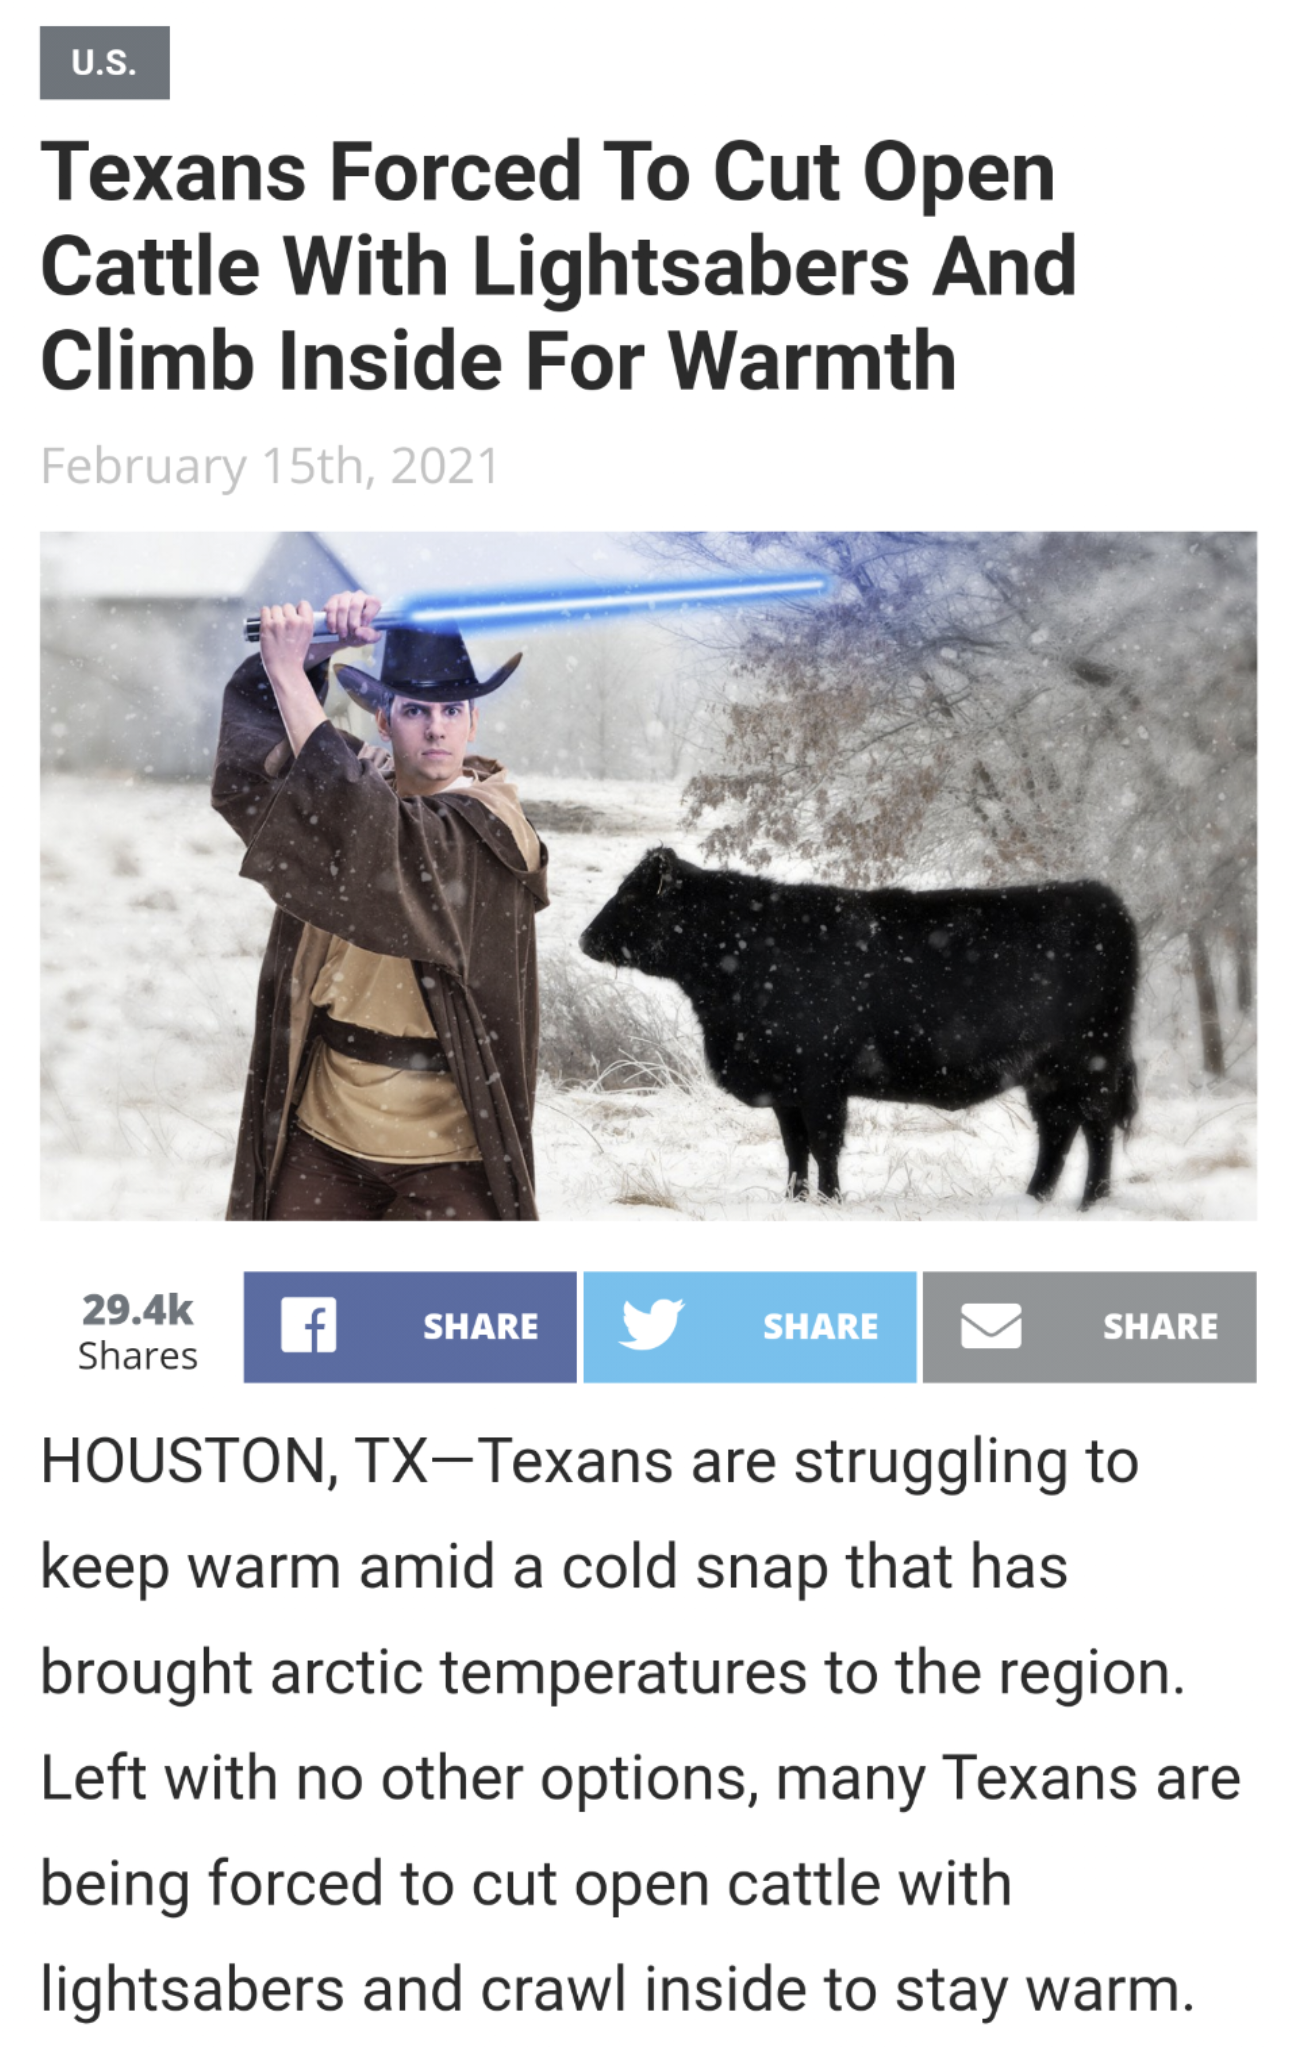 cattle - U.S. Texans Forced To Cut Open Cattle With Lightsabers And Climb Inside For Warmth February 15th, 2021 Houston, TxTexans are struggling to keep warm amid a cold snap that has brought arctic temperatures to the region. Left with no other options, 